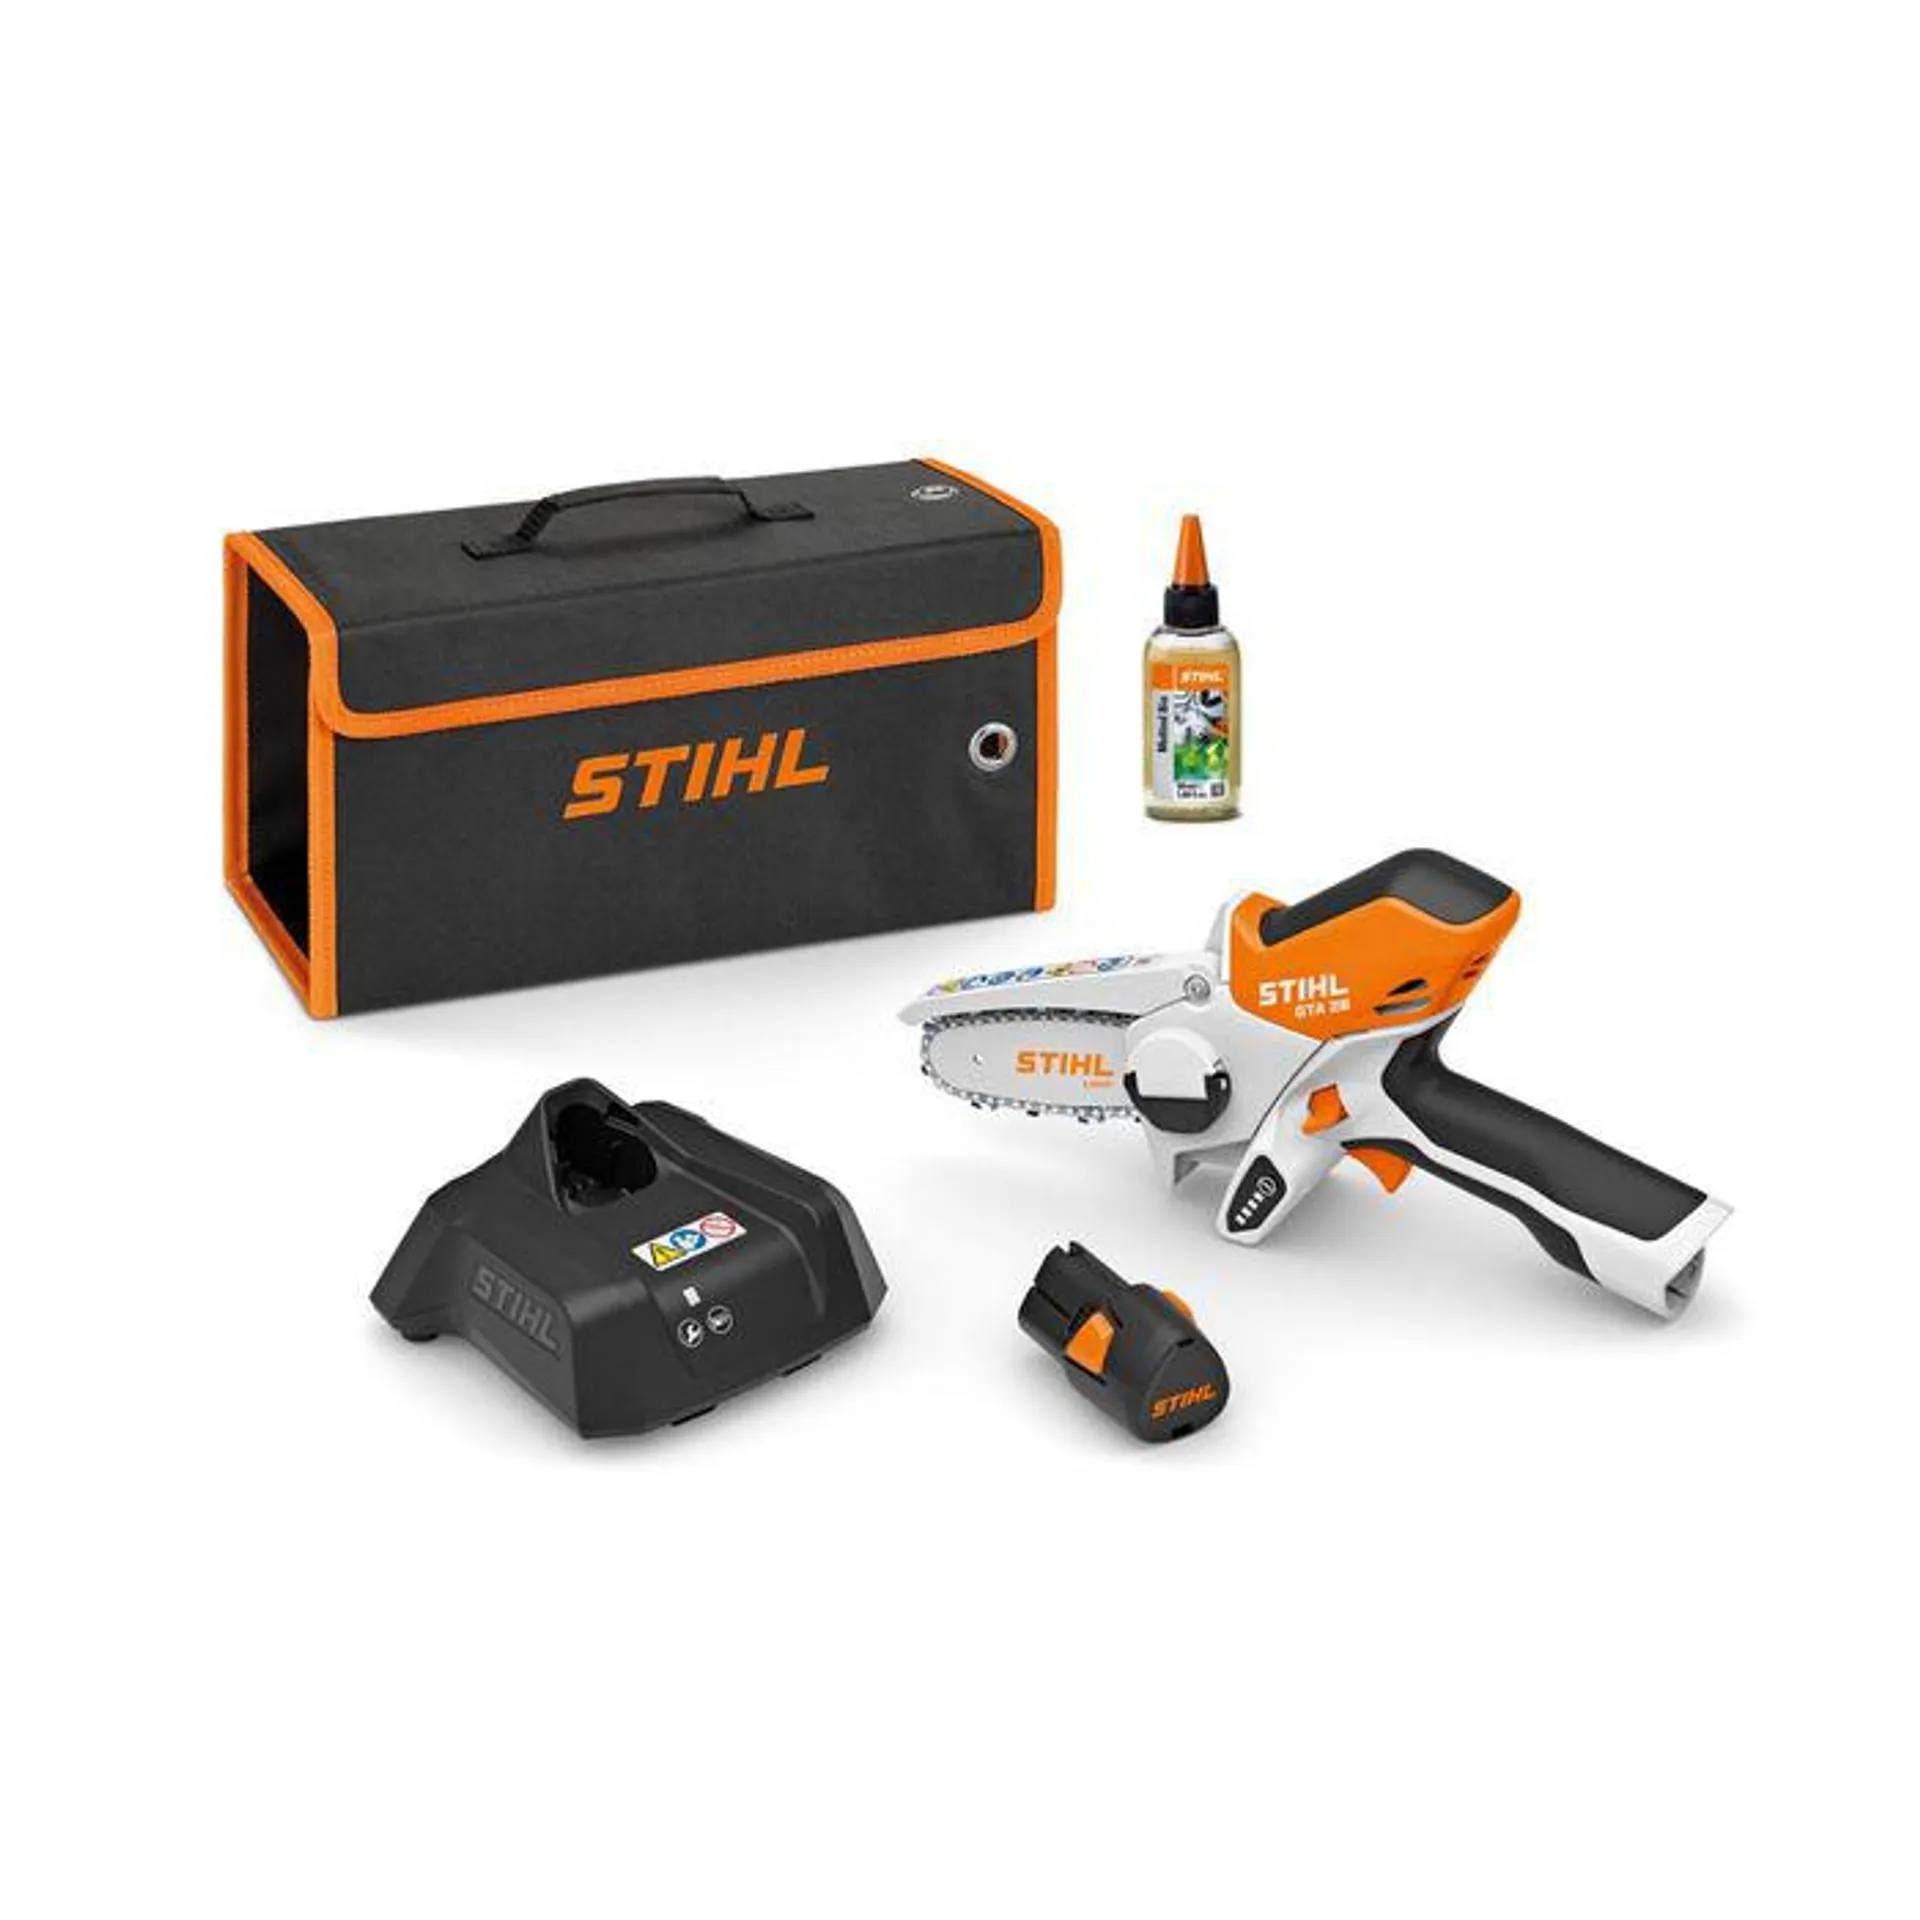 STIHL GTA 26 Battery Pruner Kit With Battery & Charger